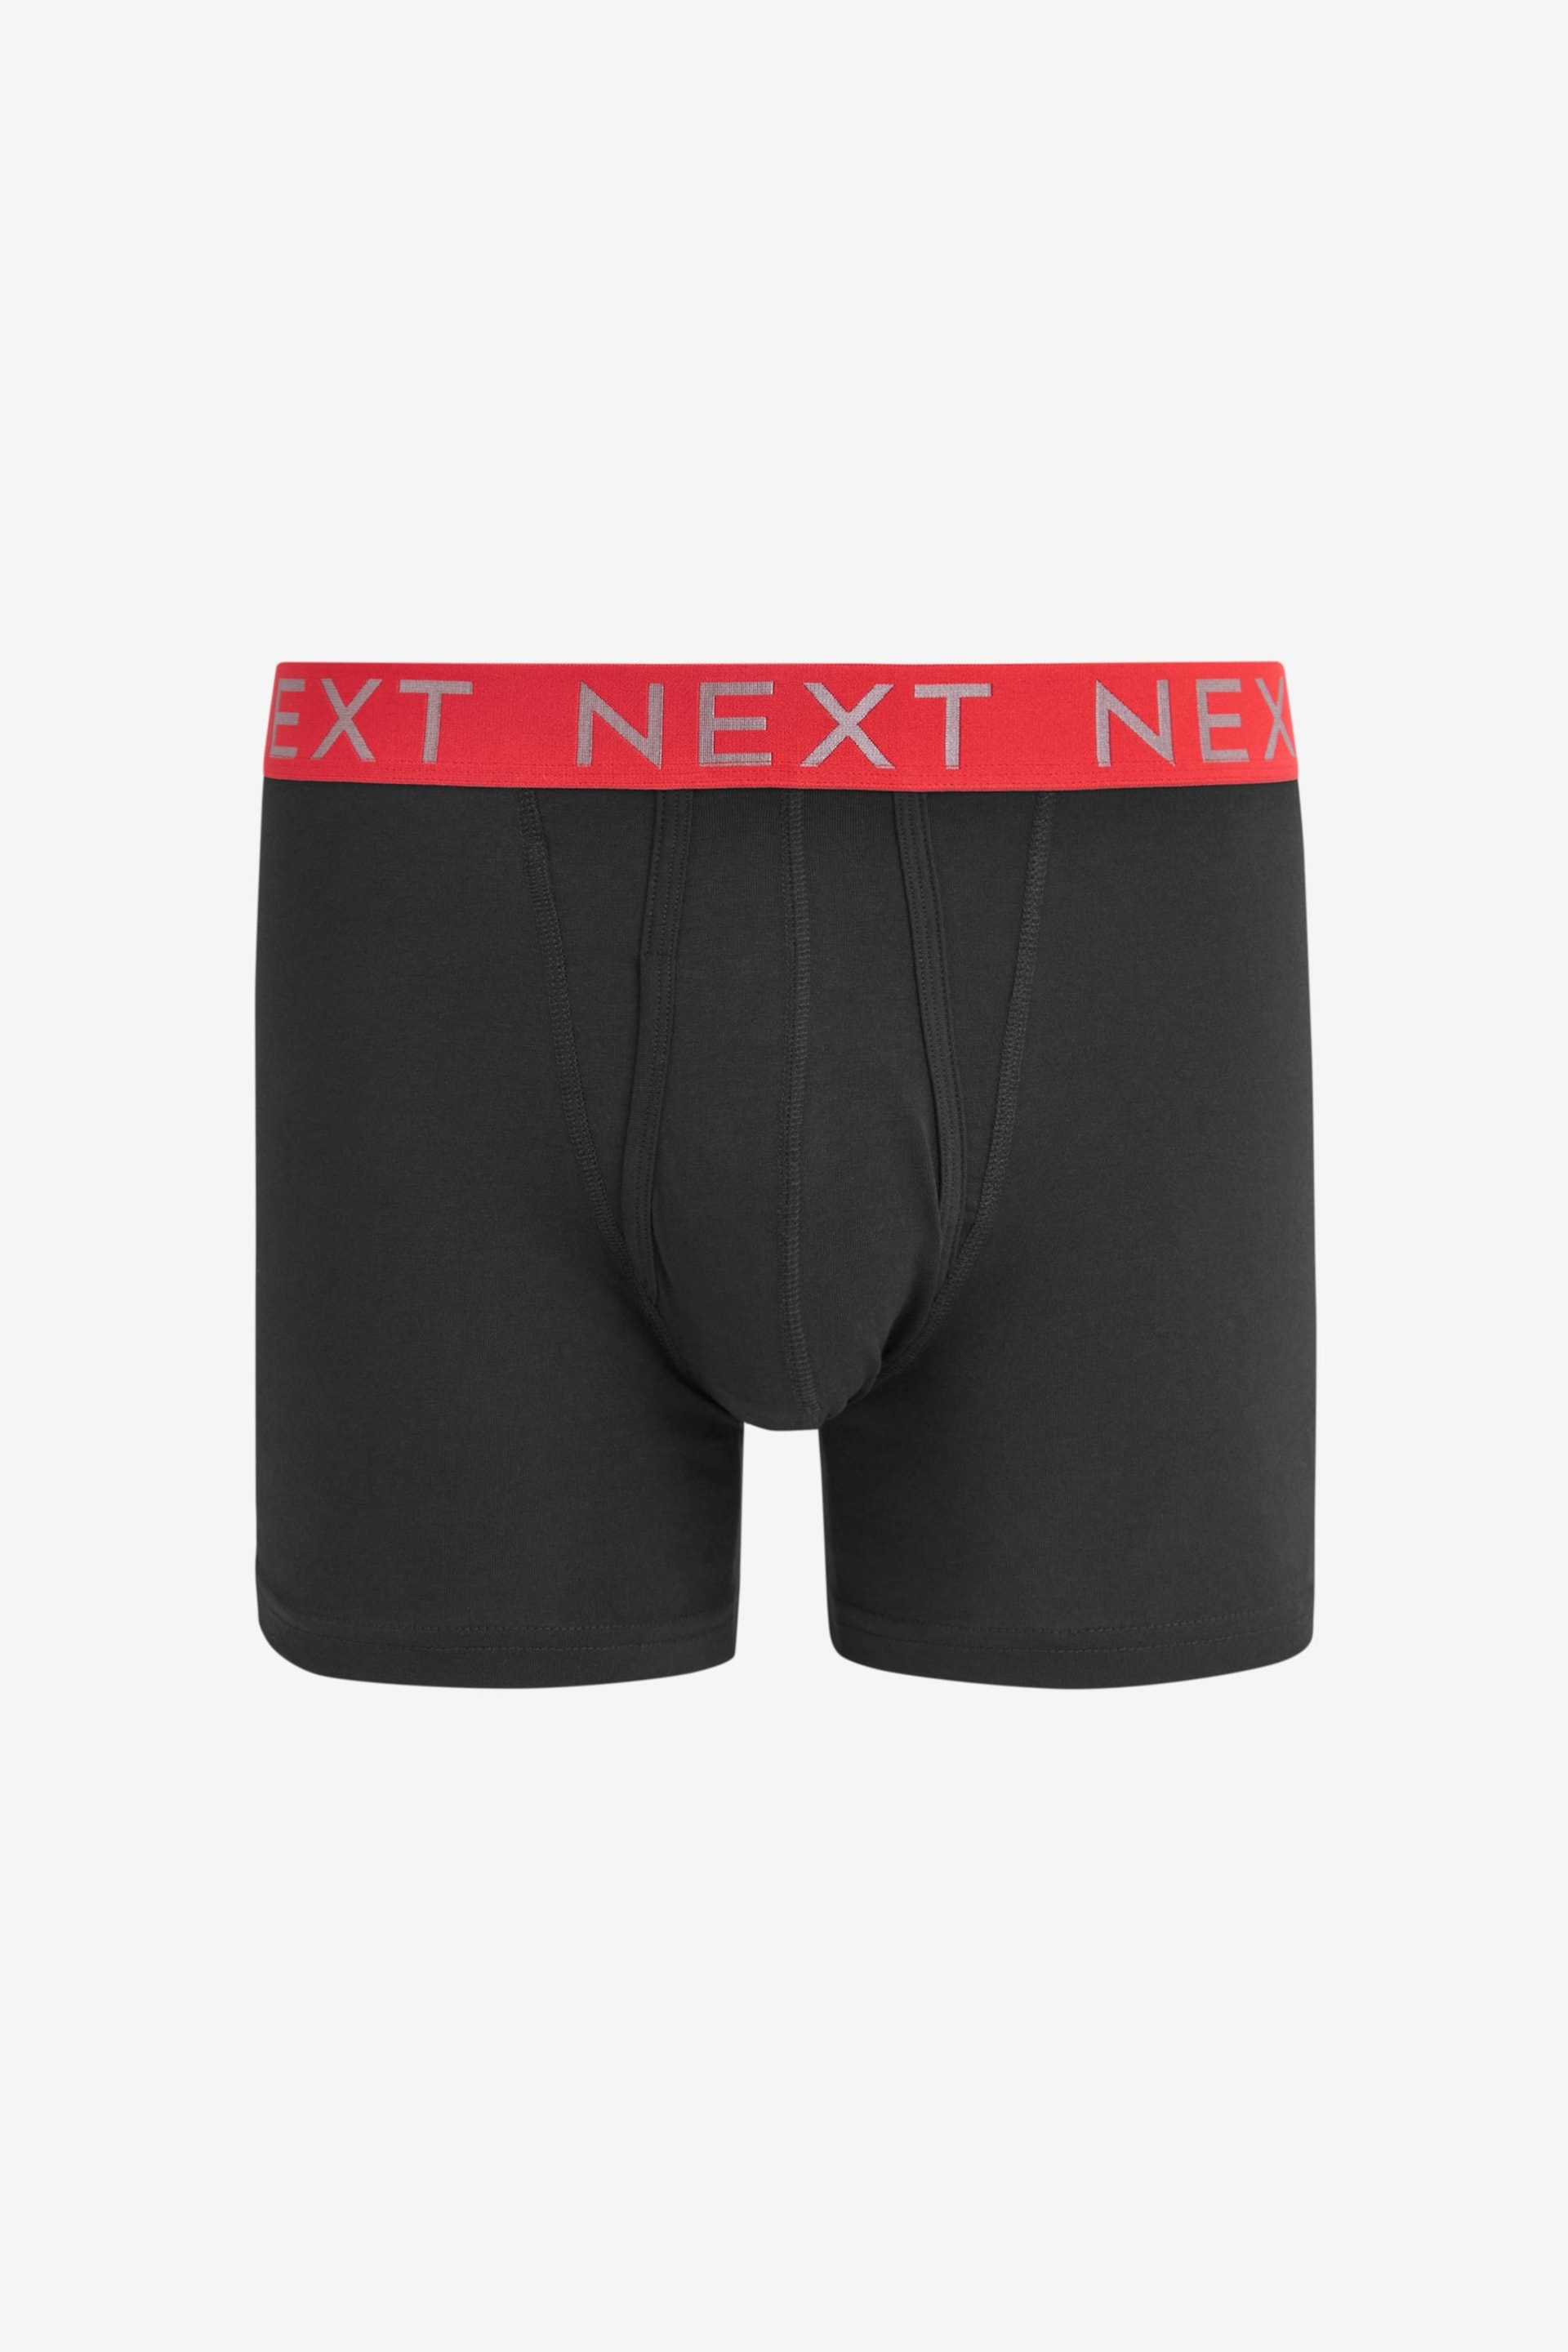 Black Bright Waistband A-Front Boxers 8 Pack - Image 2 of 13